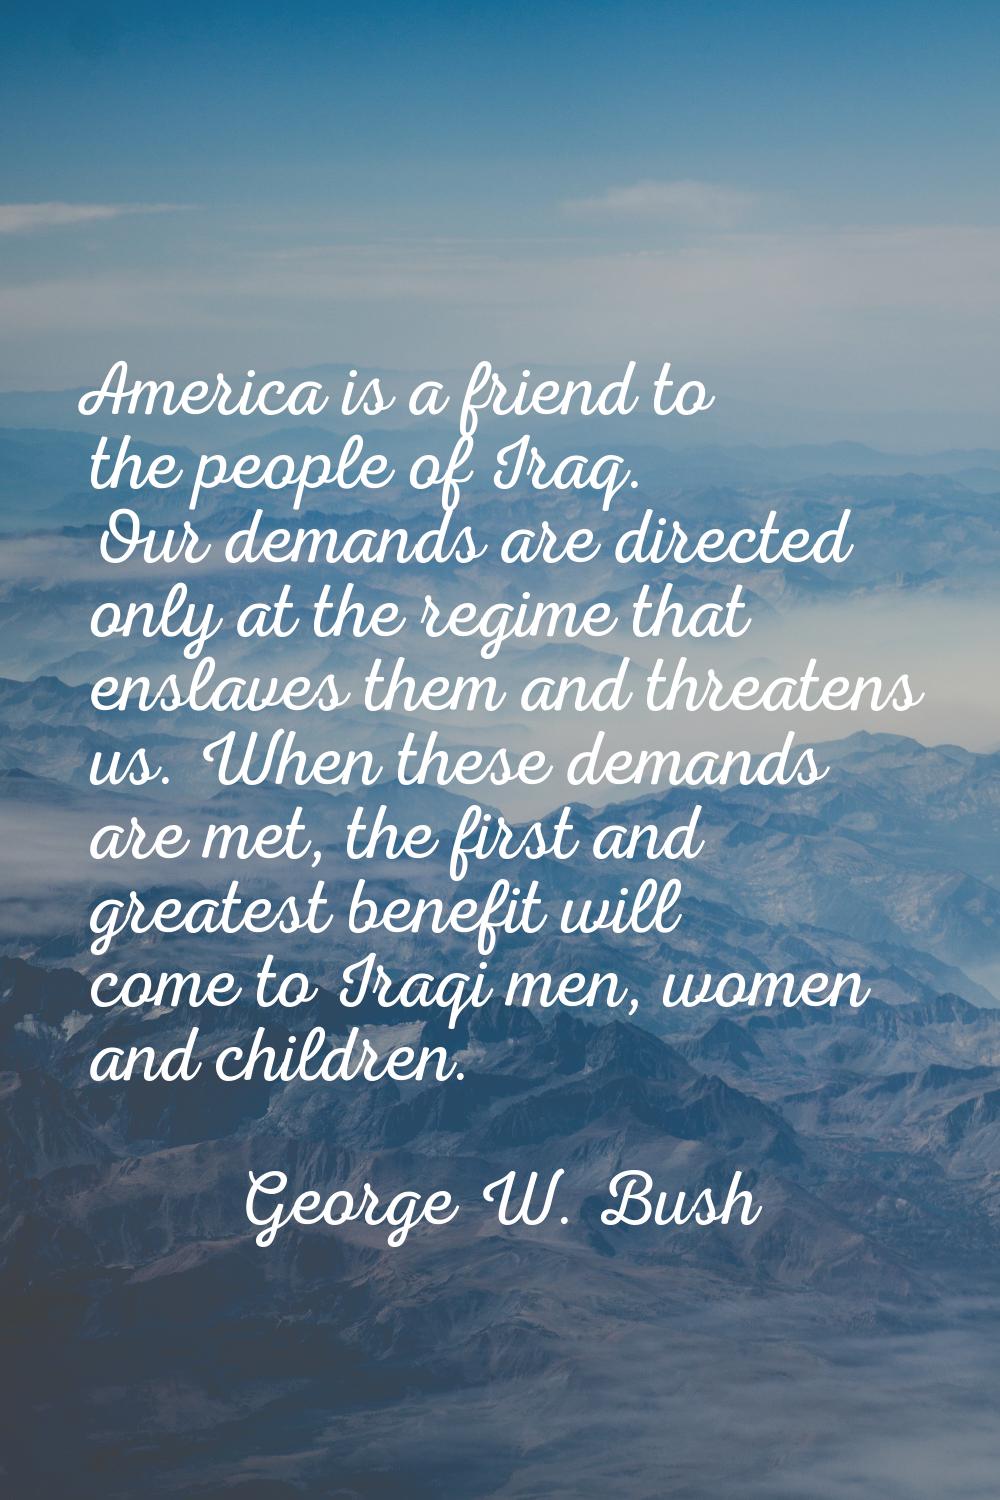 America is a friend to the people of Iraq. Our demands are directed only at the regime that enslave